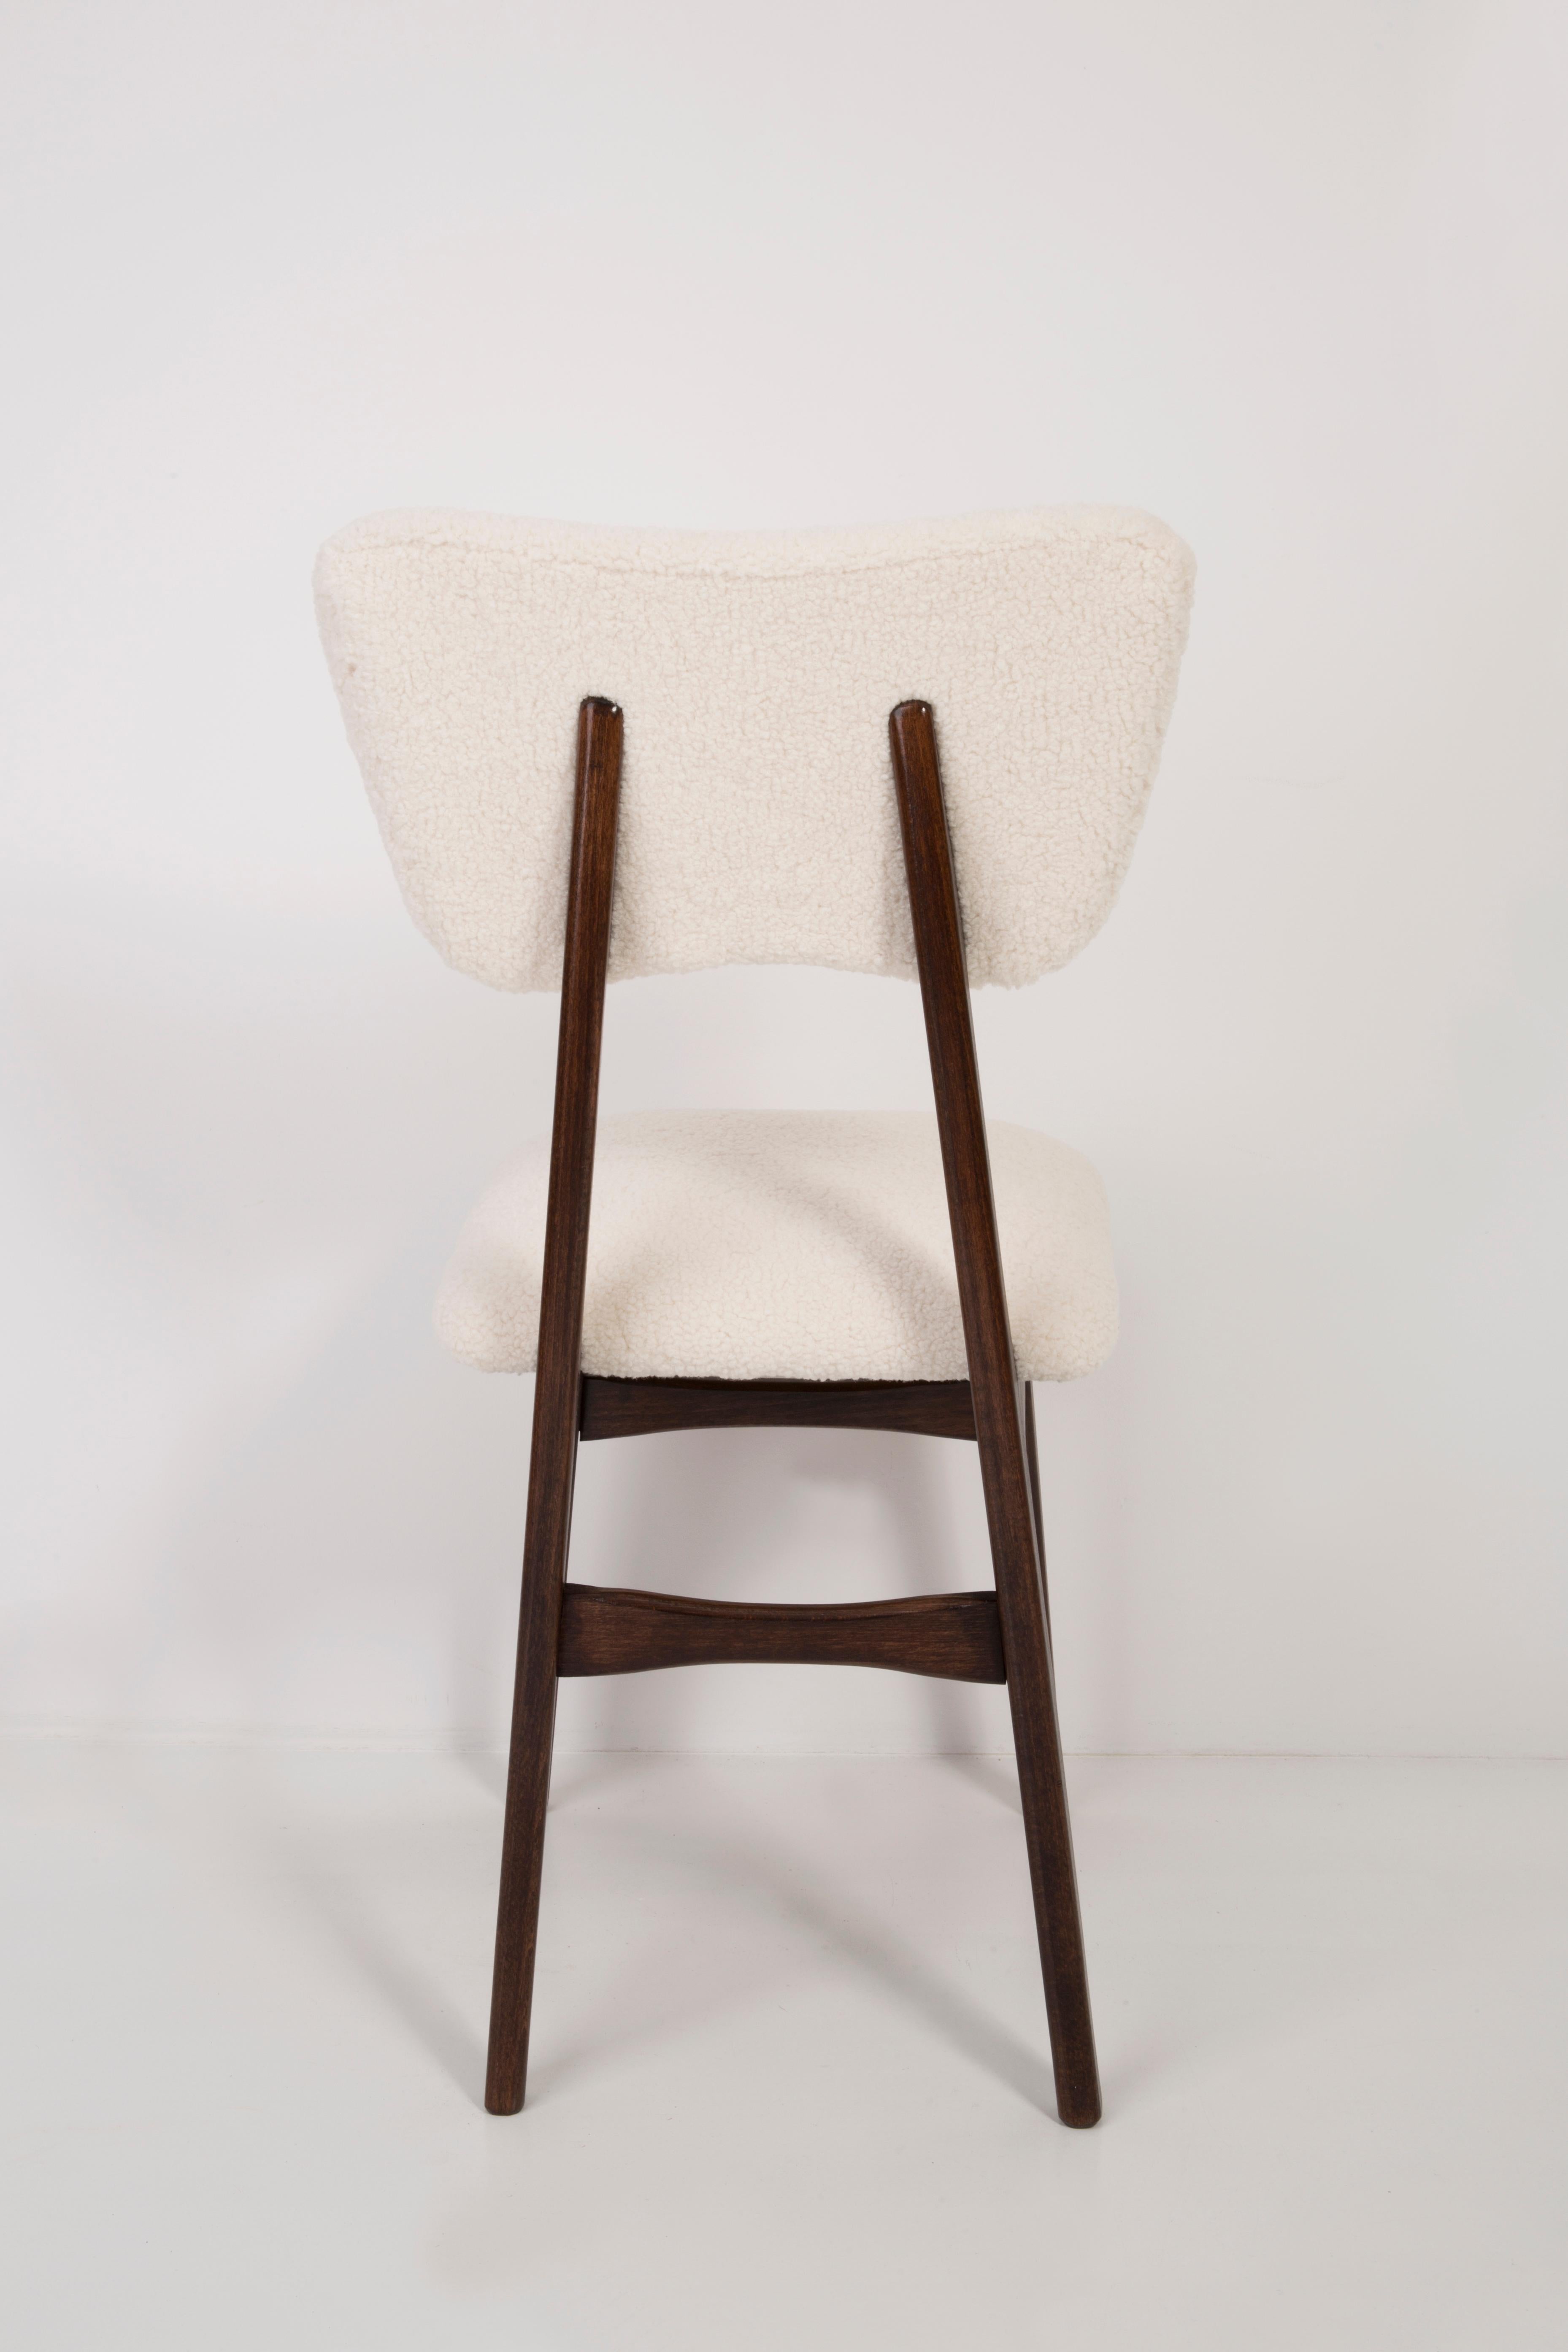 Hand-Crafted Set of Four 20th Century Light Crème Boucle Chairs, 1960s For Sale